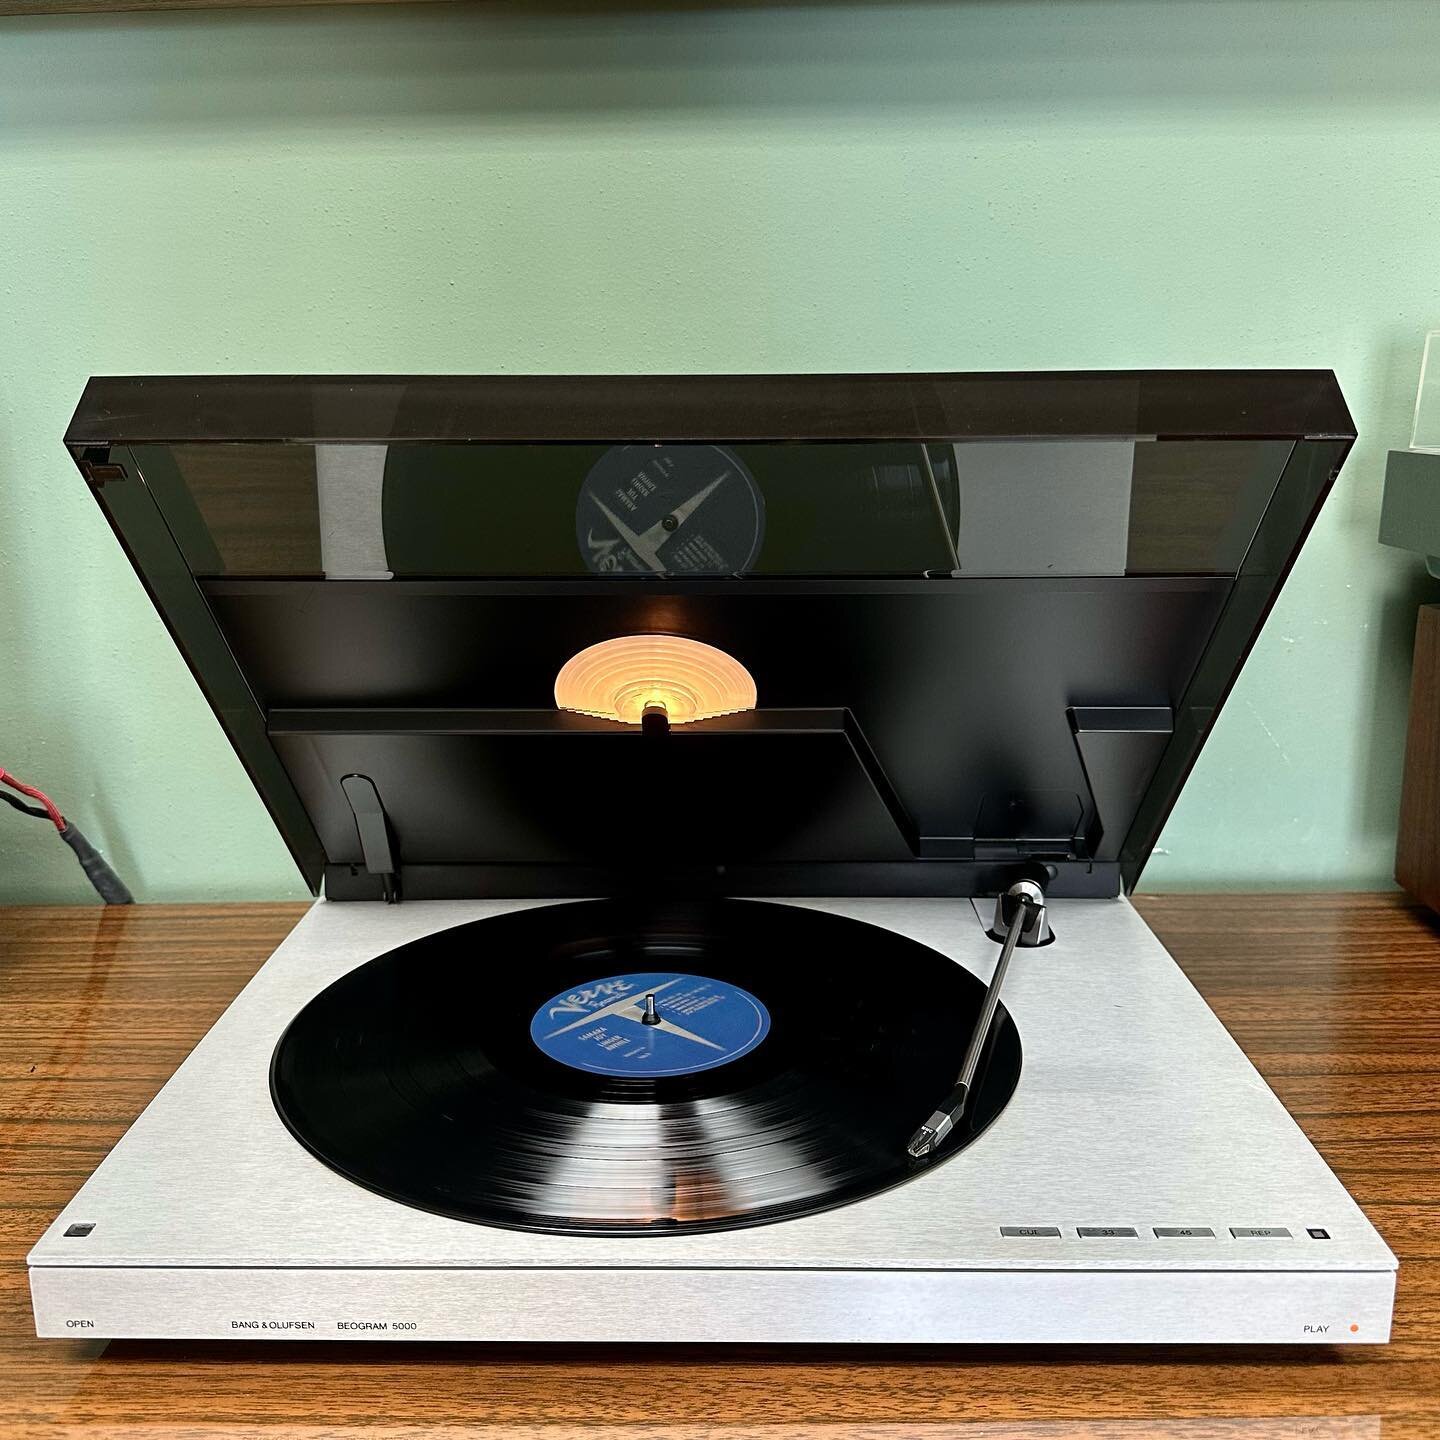 [AVAILABLE] For those of you celebrating Record Store Day tomorrow, perhaps it&rsquo;s time to not only pick up some vinyl but a better turntable too? 🤔
May we humbly suggest this Beogram 5000 by Bang &amp; Olufsen. 
This easy to use fully automatic